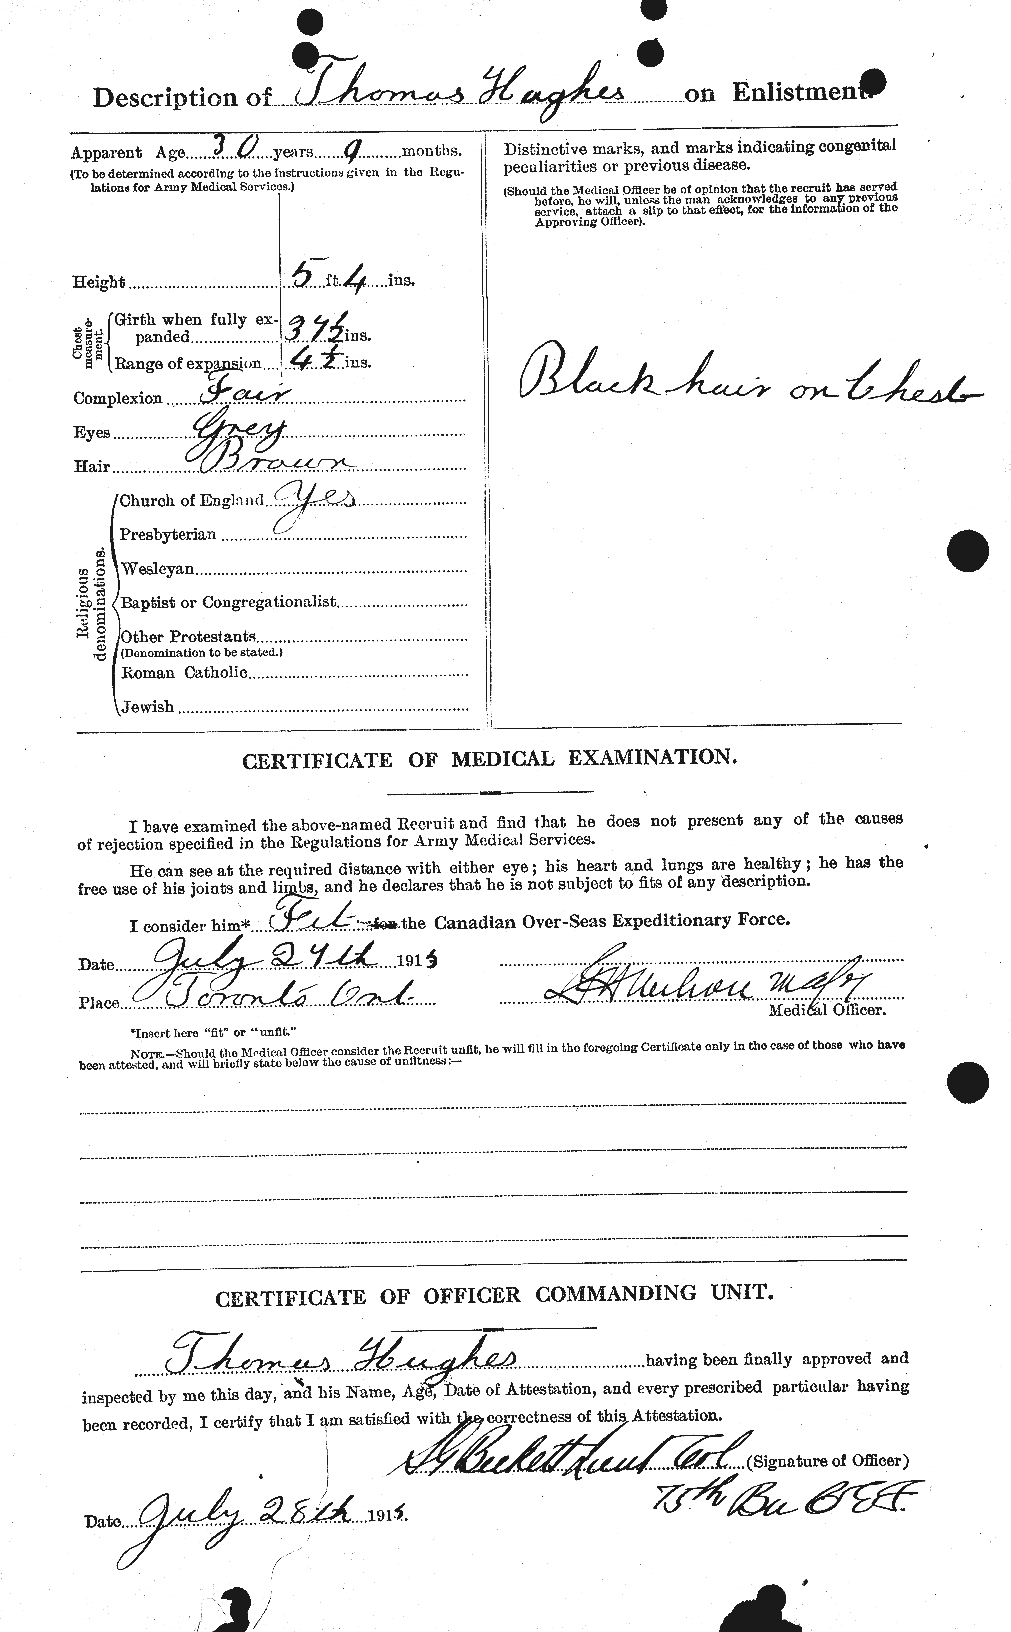 Personnel Records of the First World War - CEF 406674b